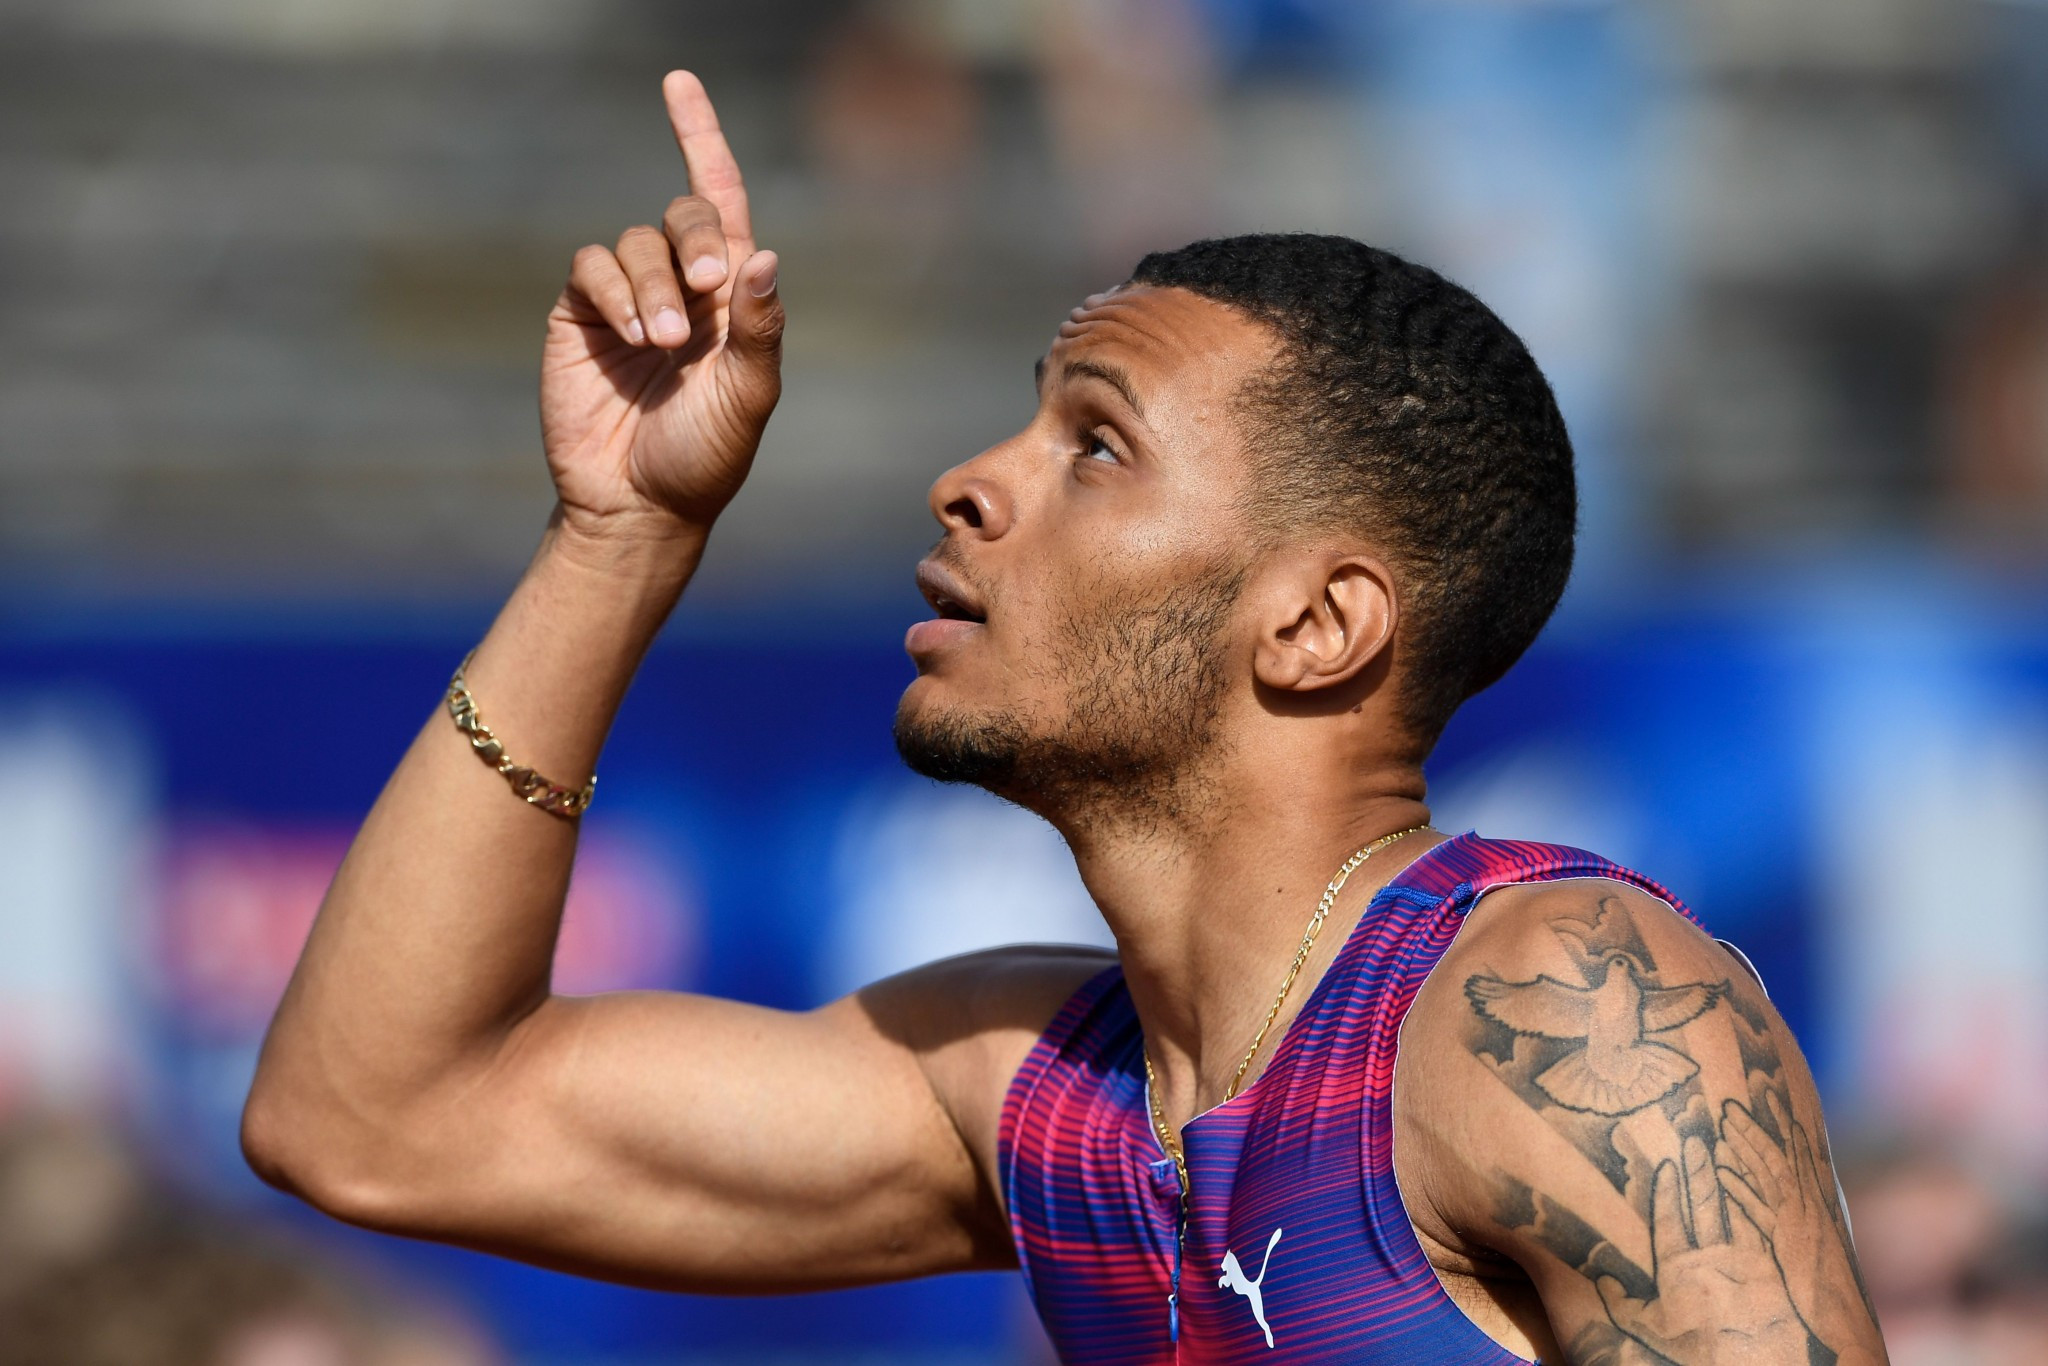 Canada's Andre De Grasse, who had hoped to challenge Usain Bolt in London over 100m, has withdrawn because of a hamstring injury ©Getty Images